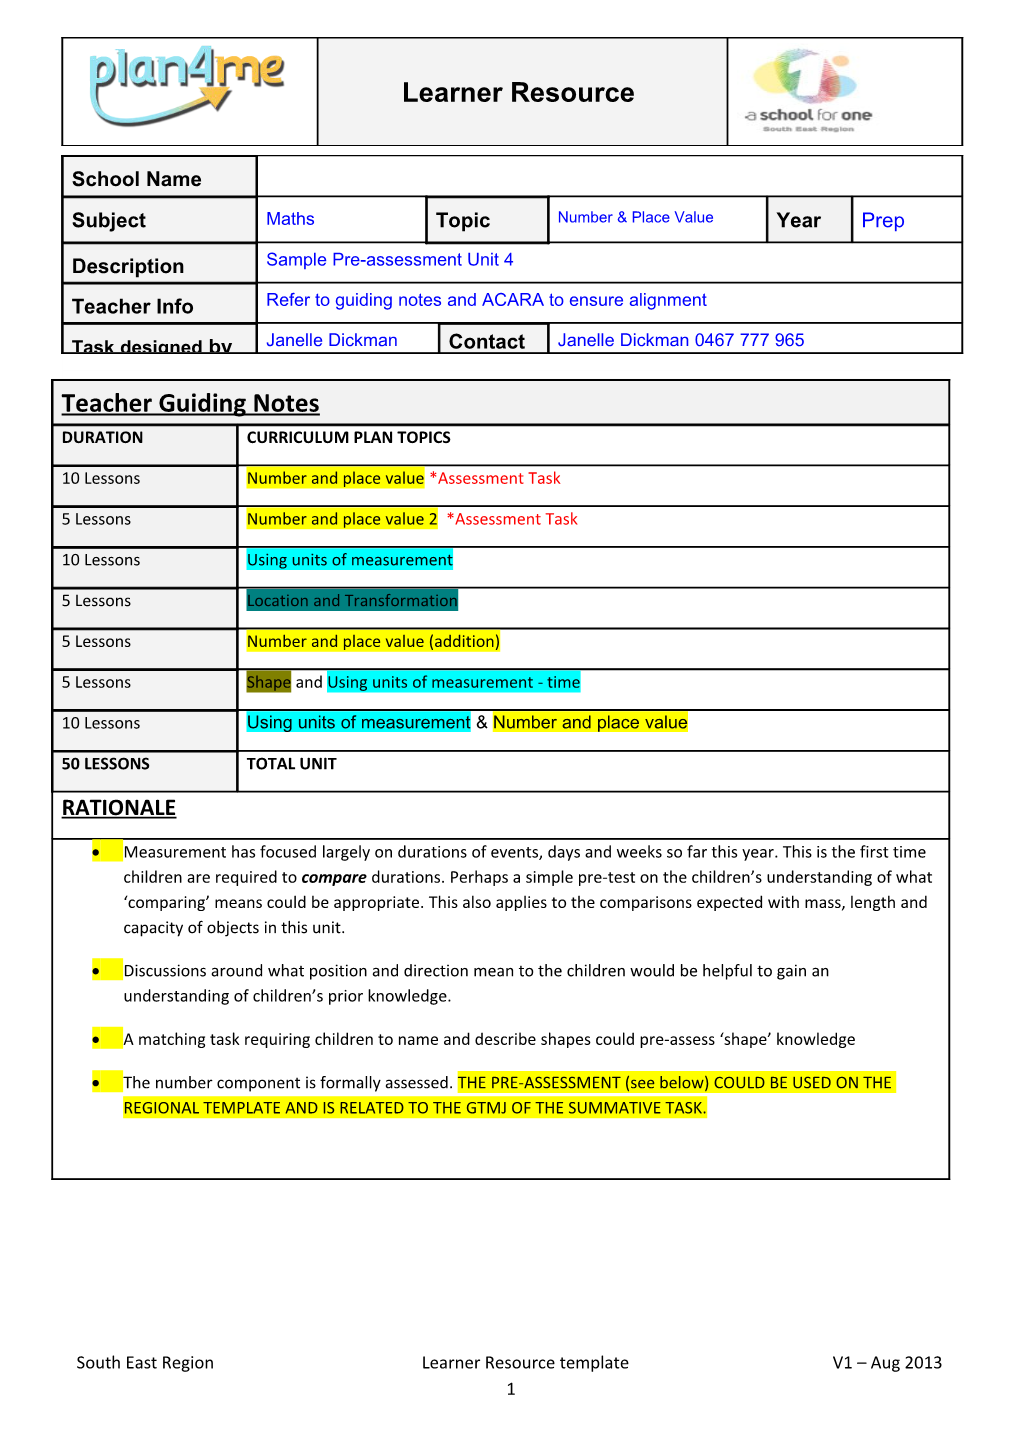 South East Region Learner Resource Template V1 Aug 2013 1